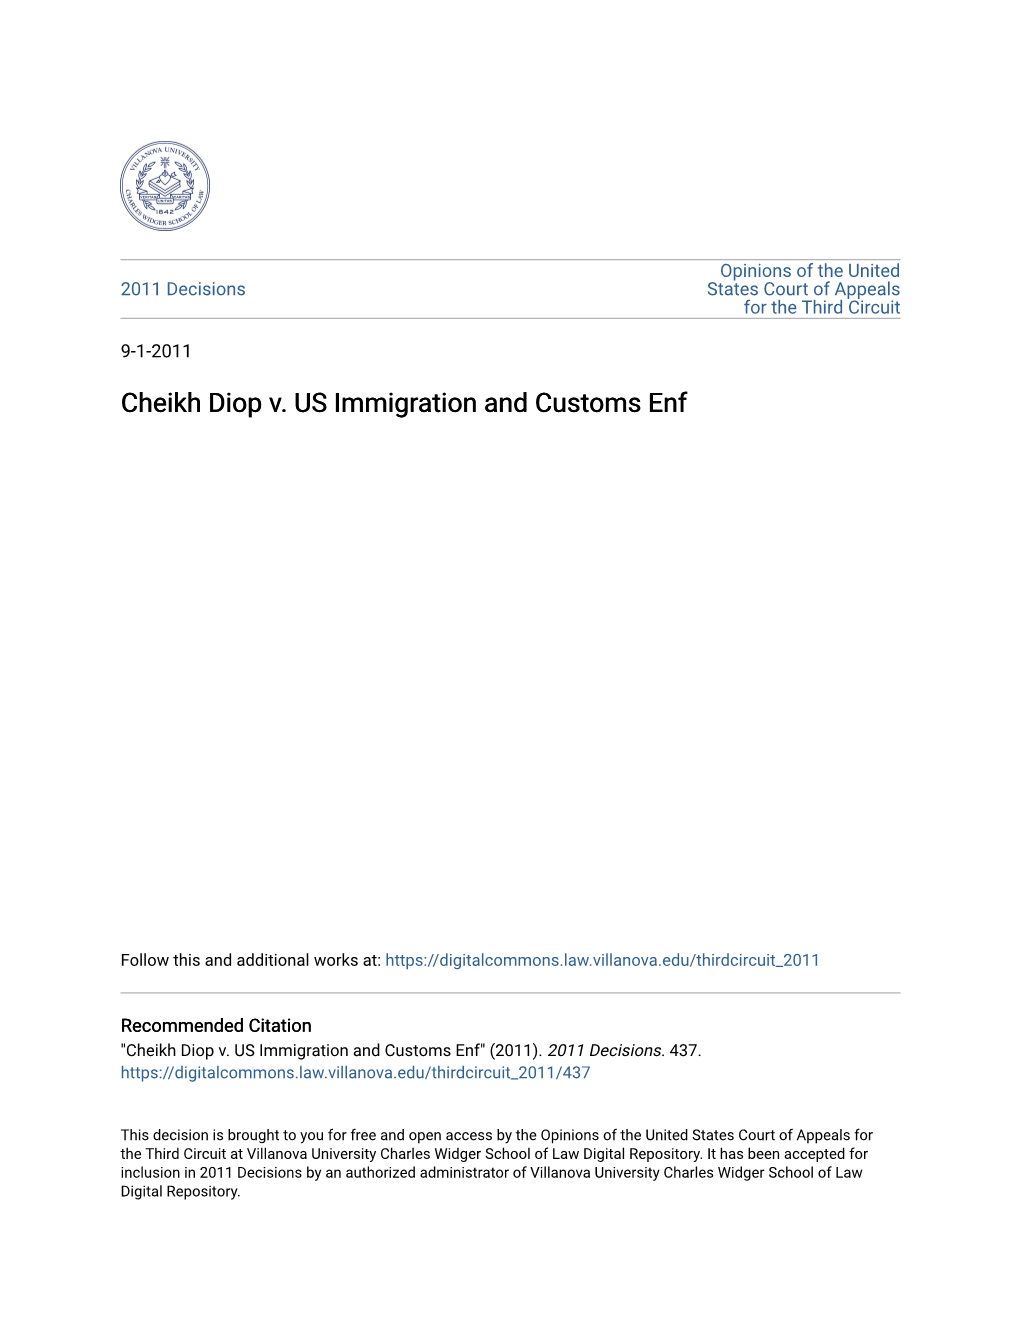 Cheikh Diop V. US Immigration and Customs Enf